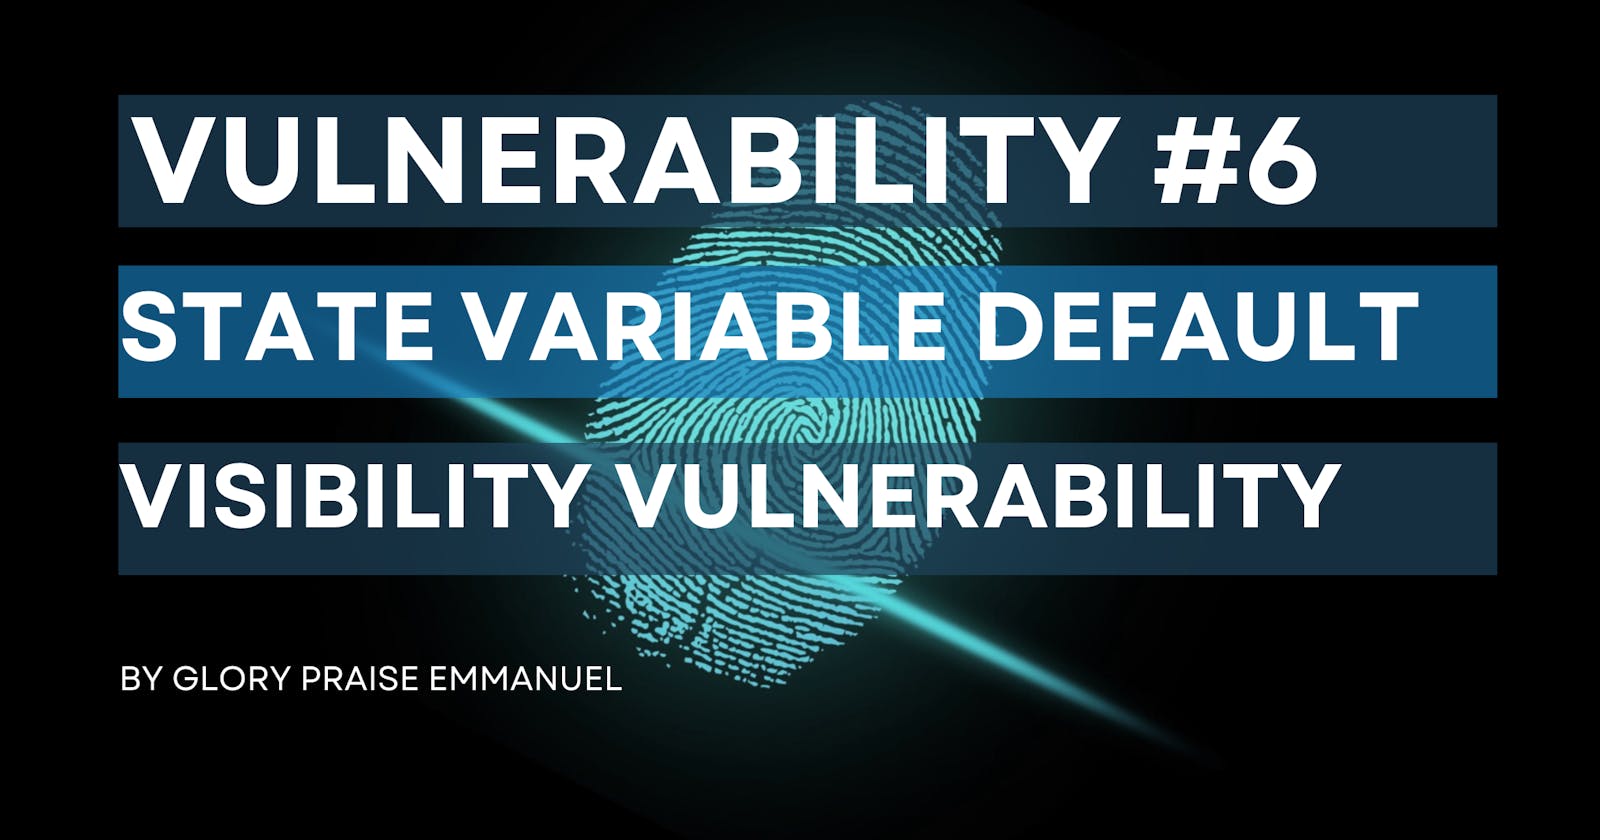 Vulnerability #6 - State Variable Default Visibility Vulnerability